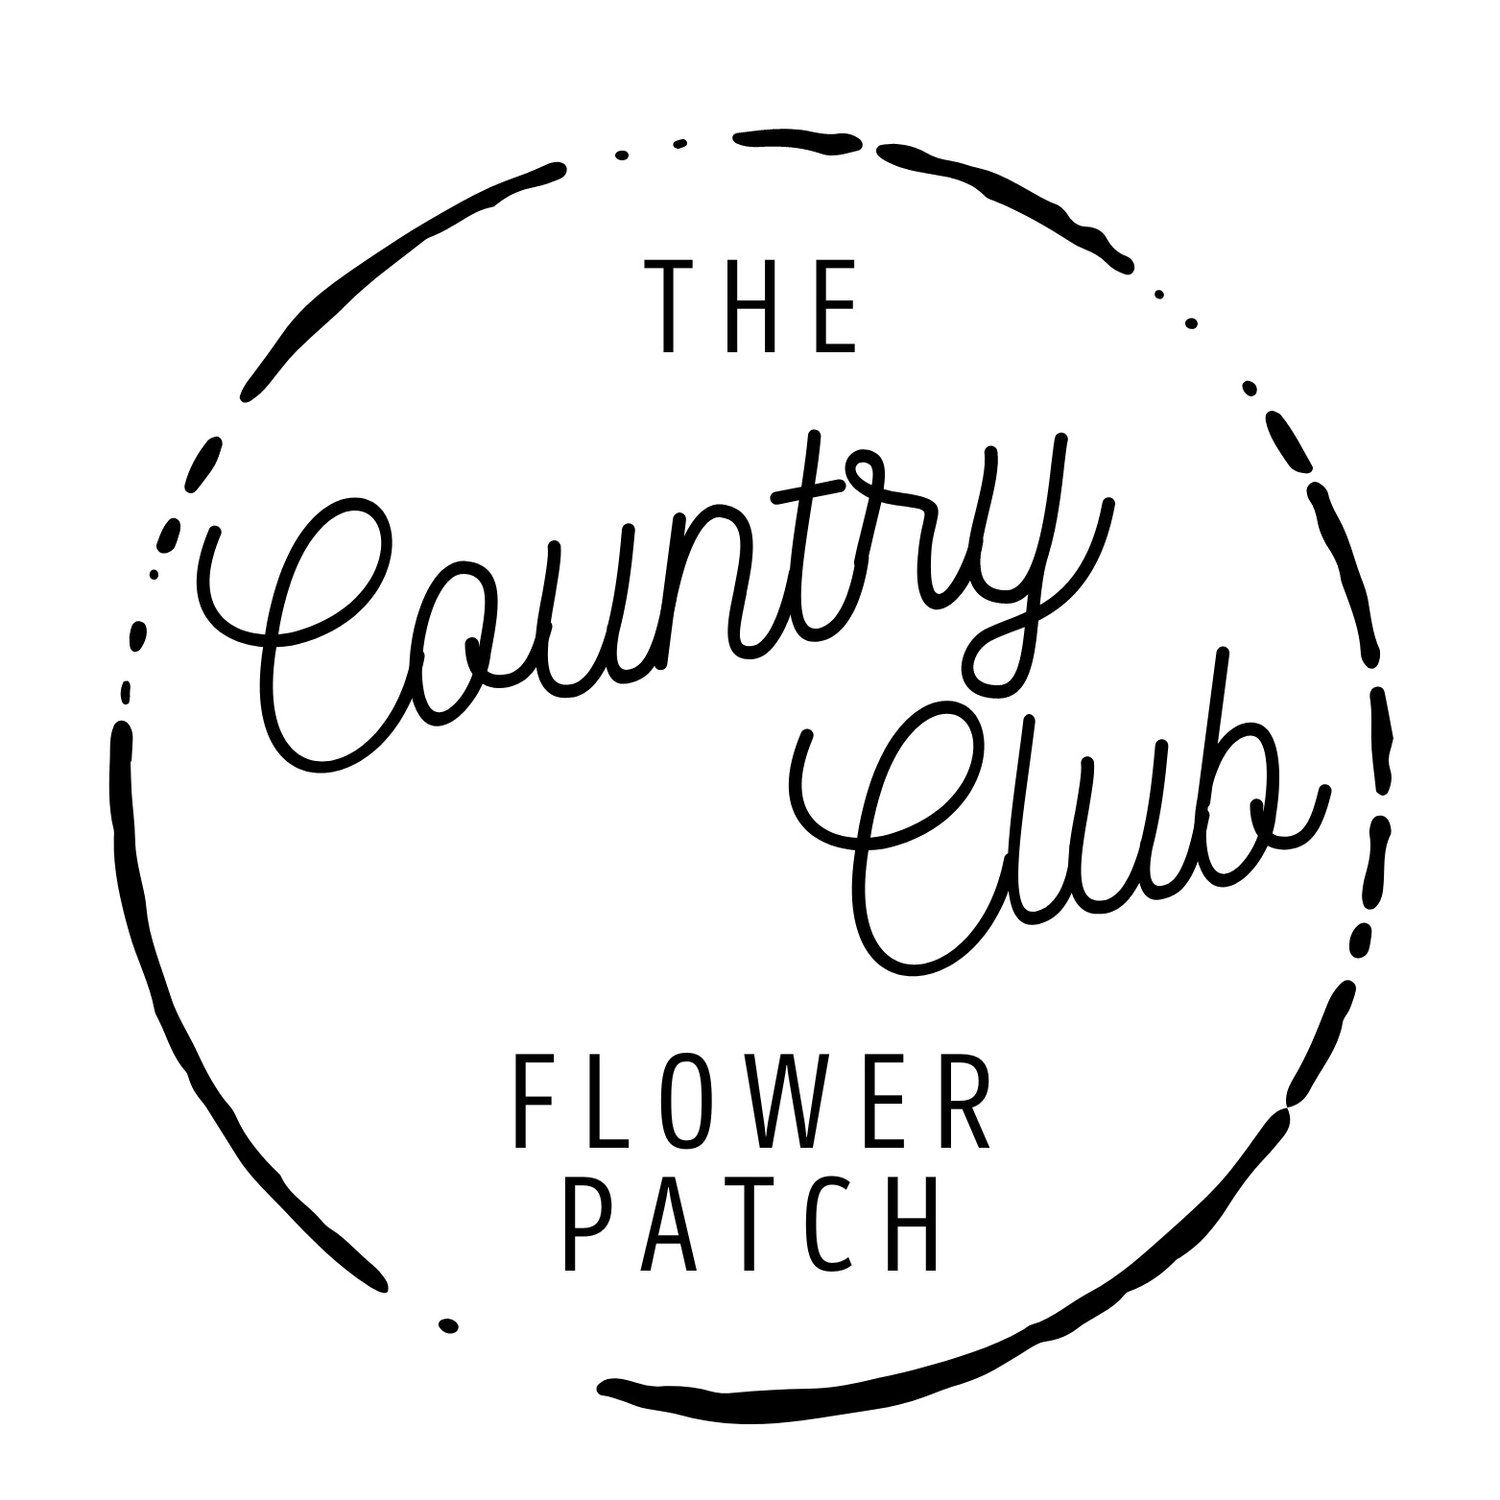 The Country Club Flower Patch